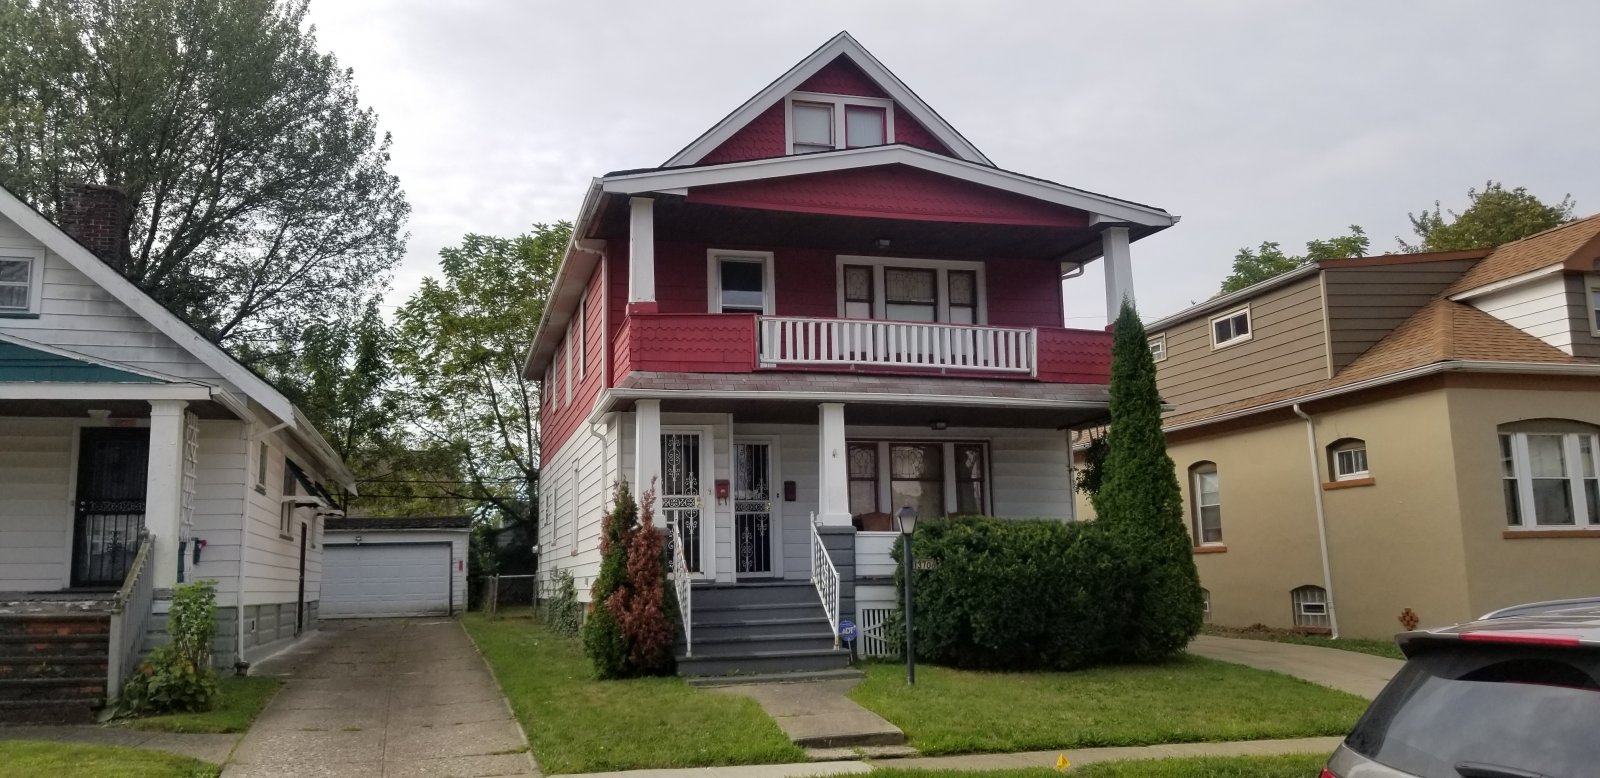 sell my house fast in cleveland ohio